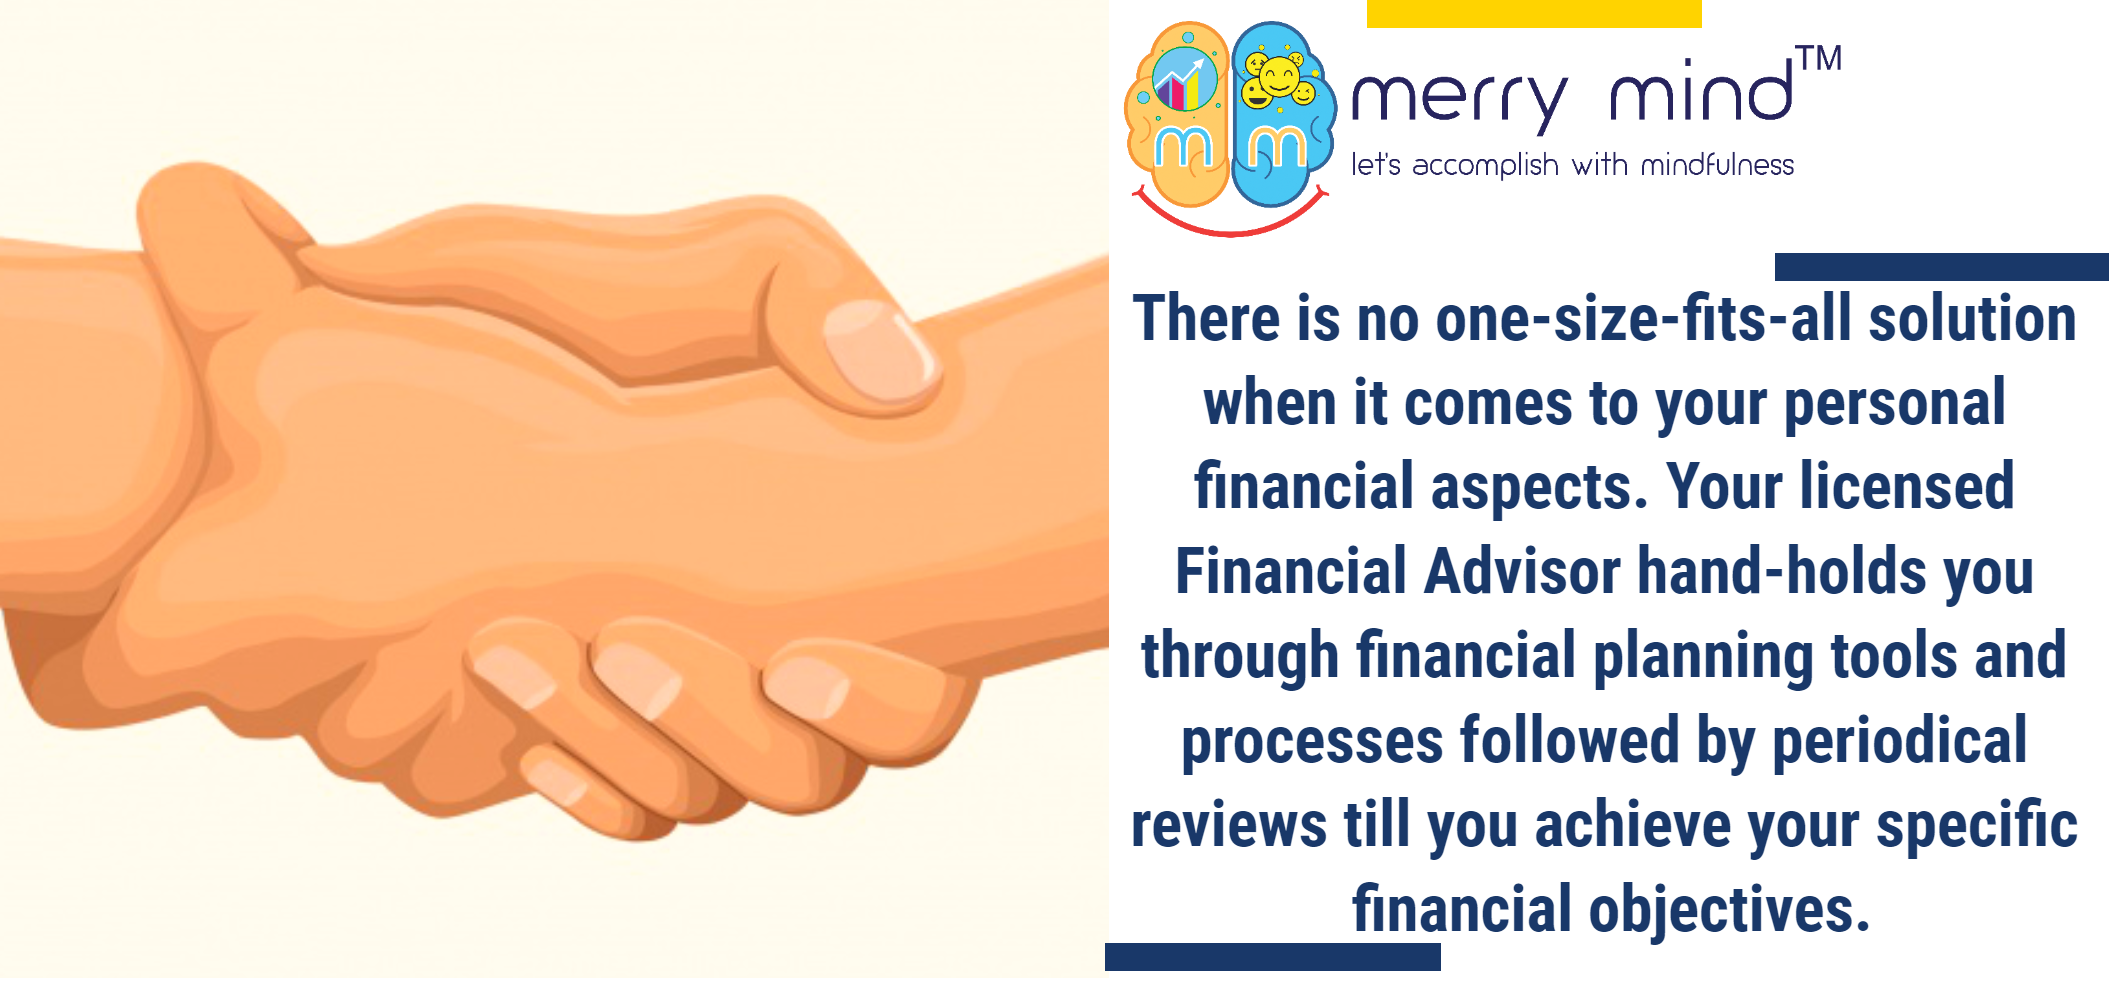 Your Financial Advisor is expected to act professionally in your best interest.